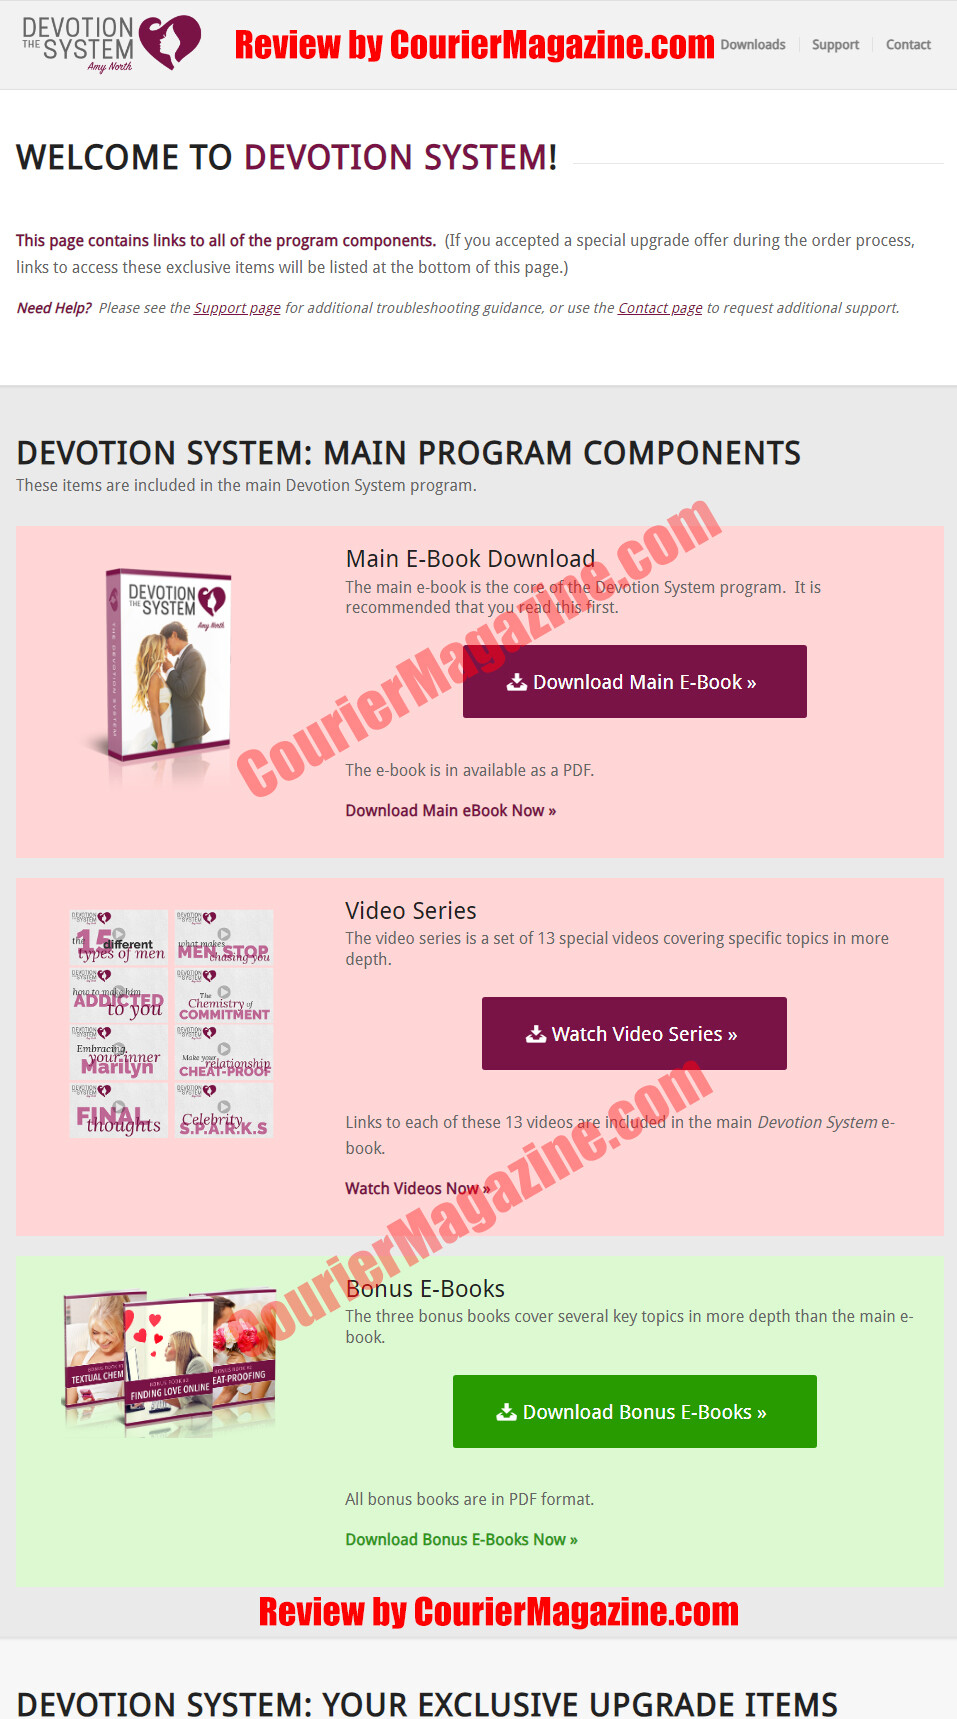 The Devotion System Download Page